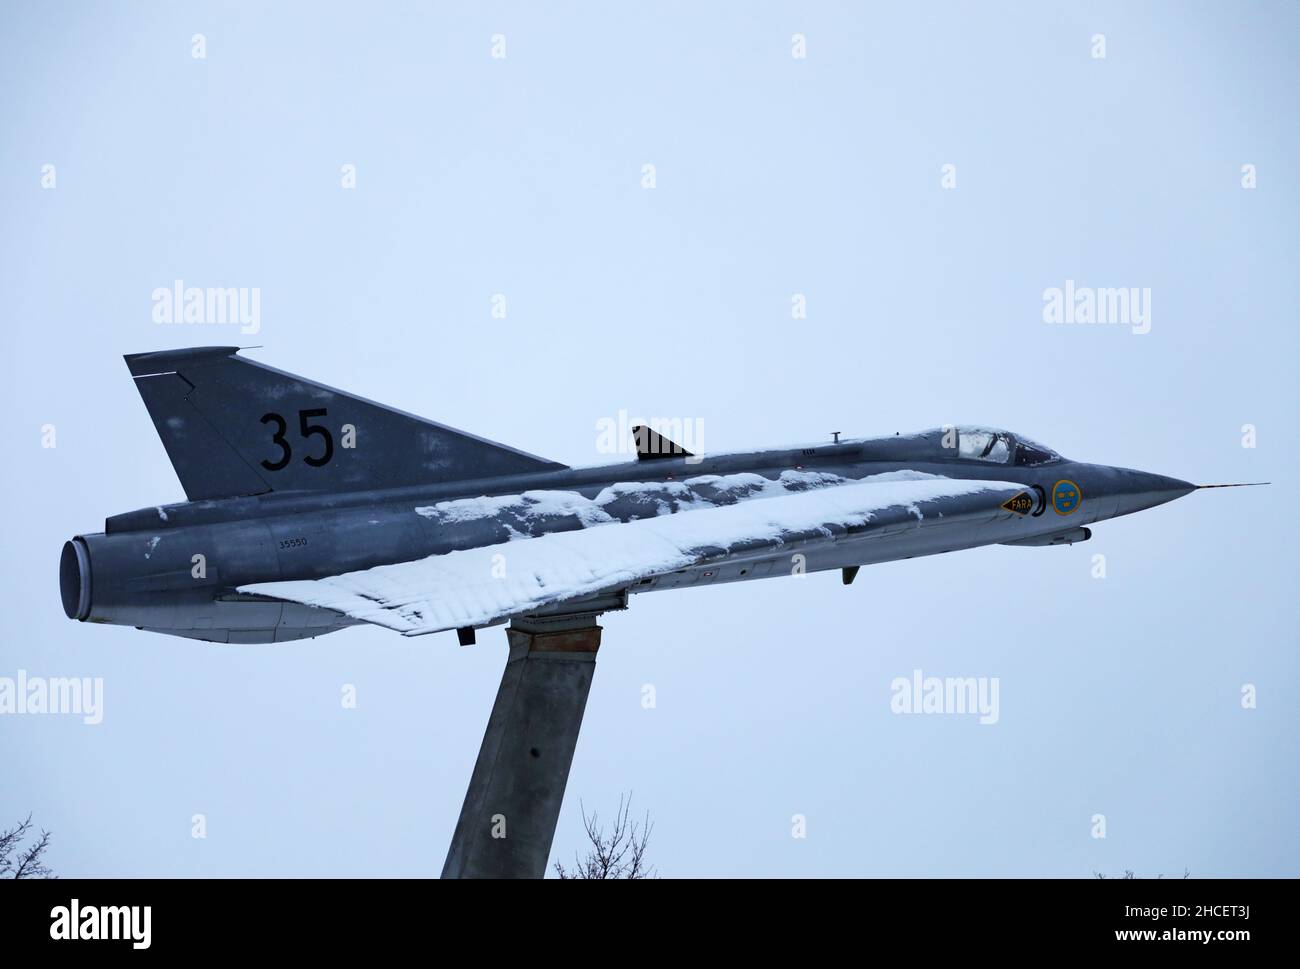 gen Werkwijze Duplicatie The Saab 35 Draken, J 35 Draken, fighter jet, ouside Saab AB in Linköping,  Sweden. On Friday, the Finnish government announced that it would buy 64  American F-35 fighter jets instead of